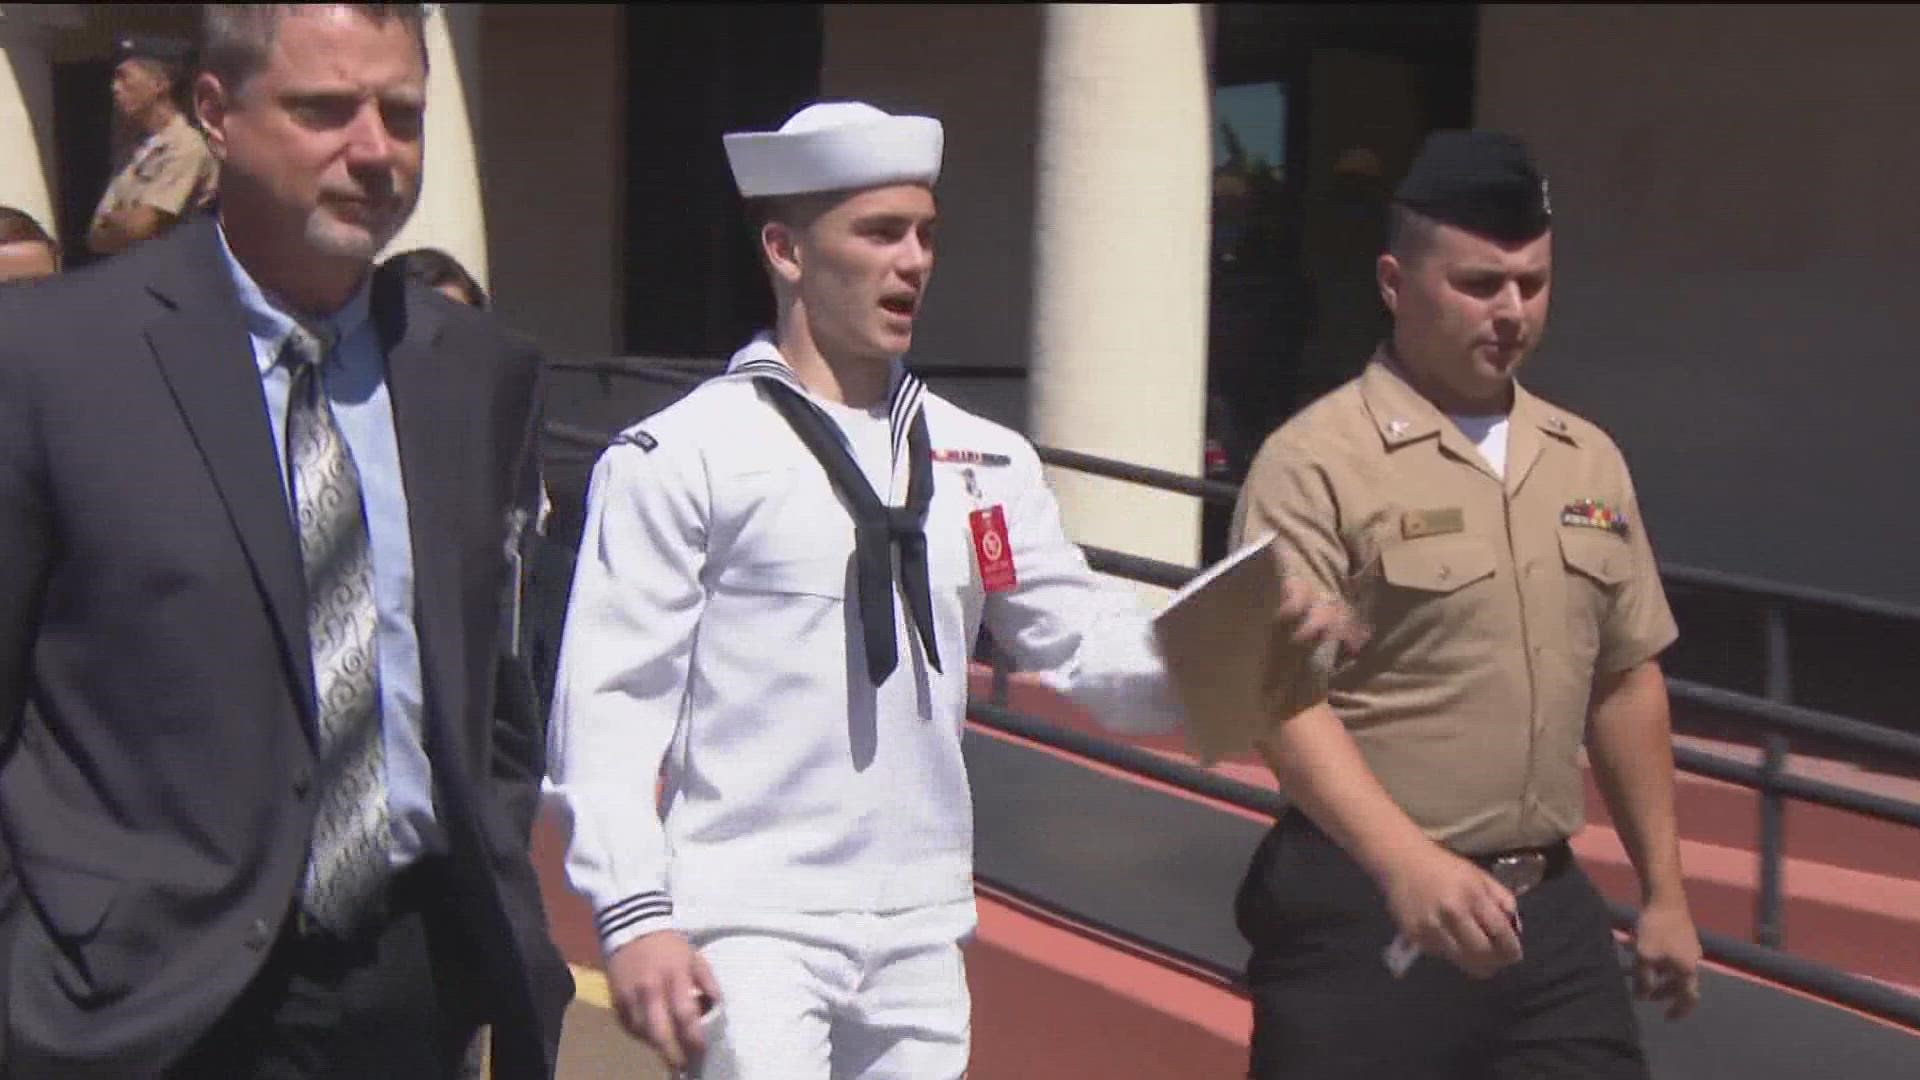 Trial begins for Navy sailor accused in USS Bonhomme Richard arson in